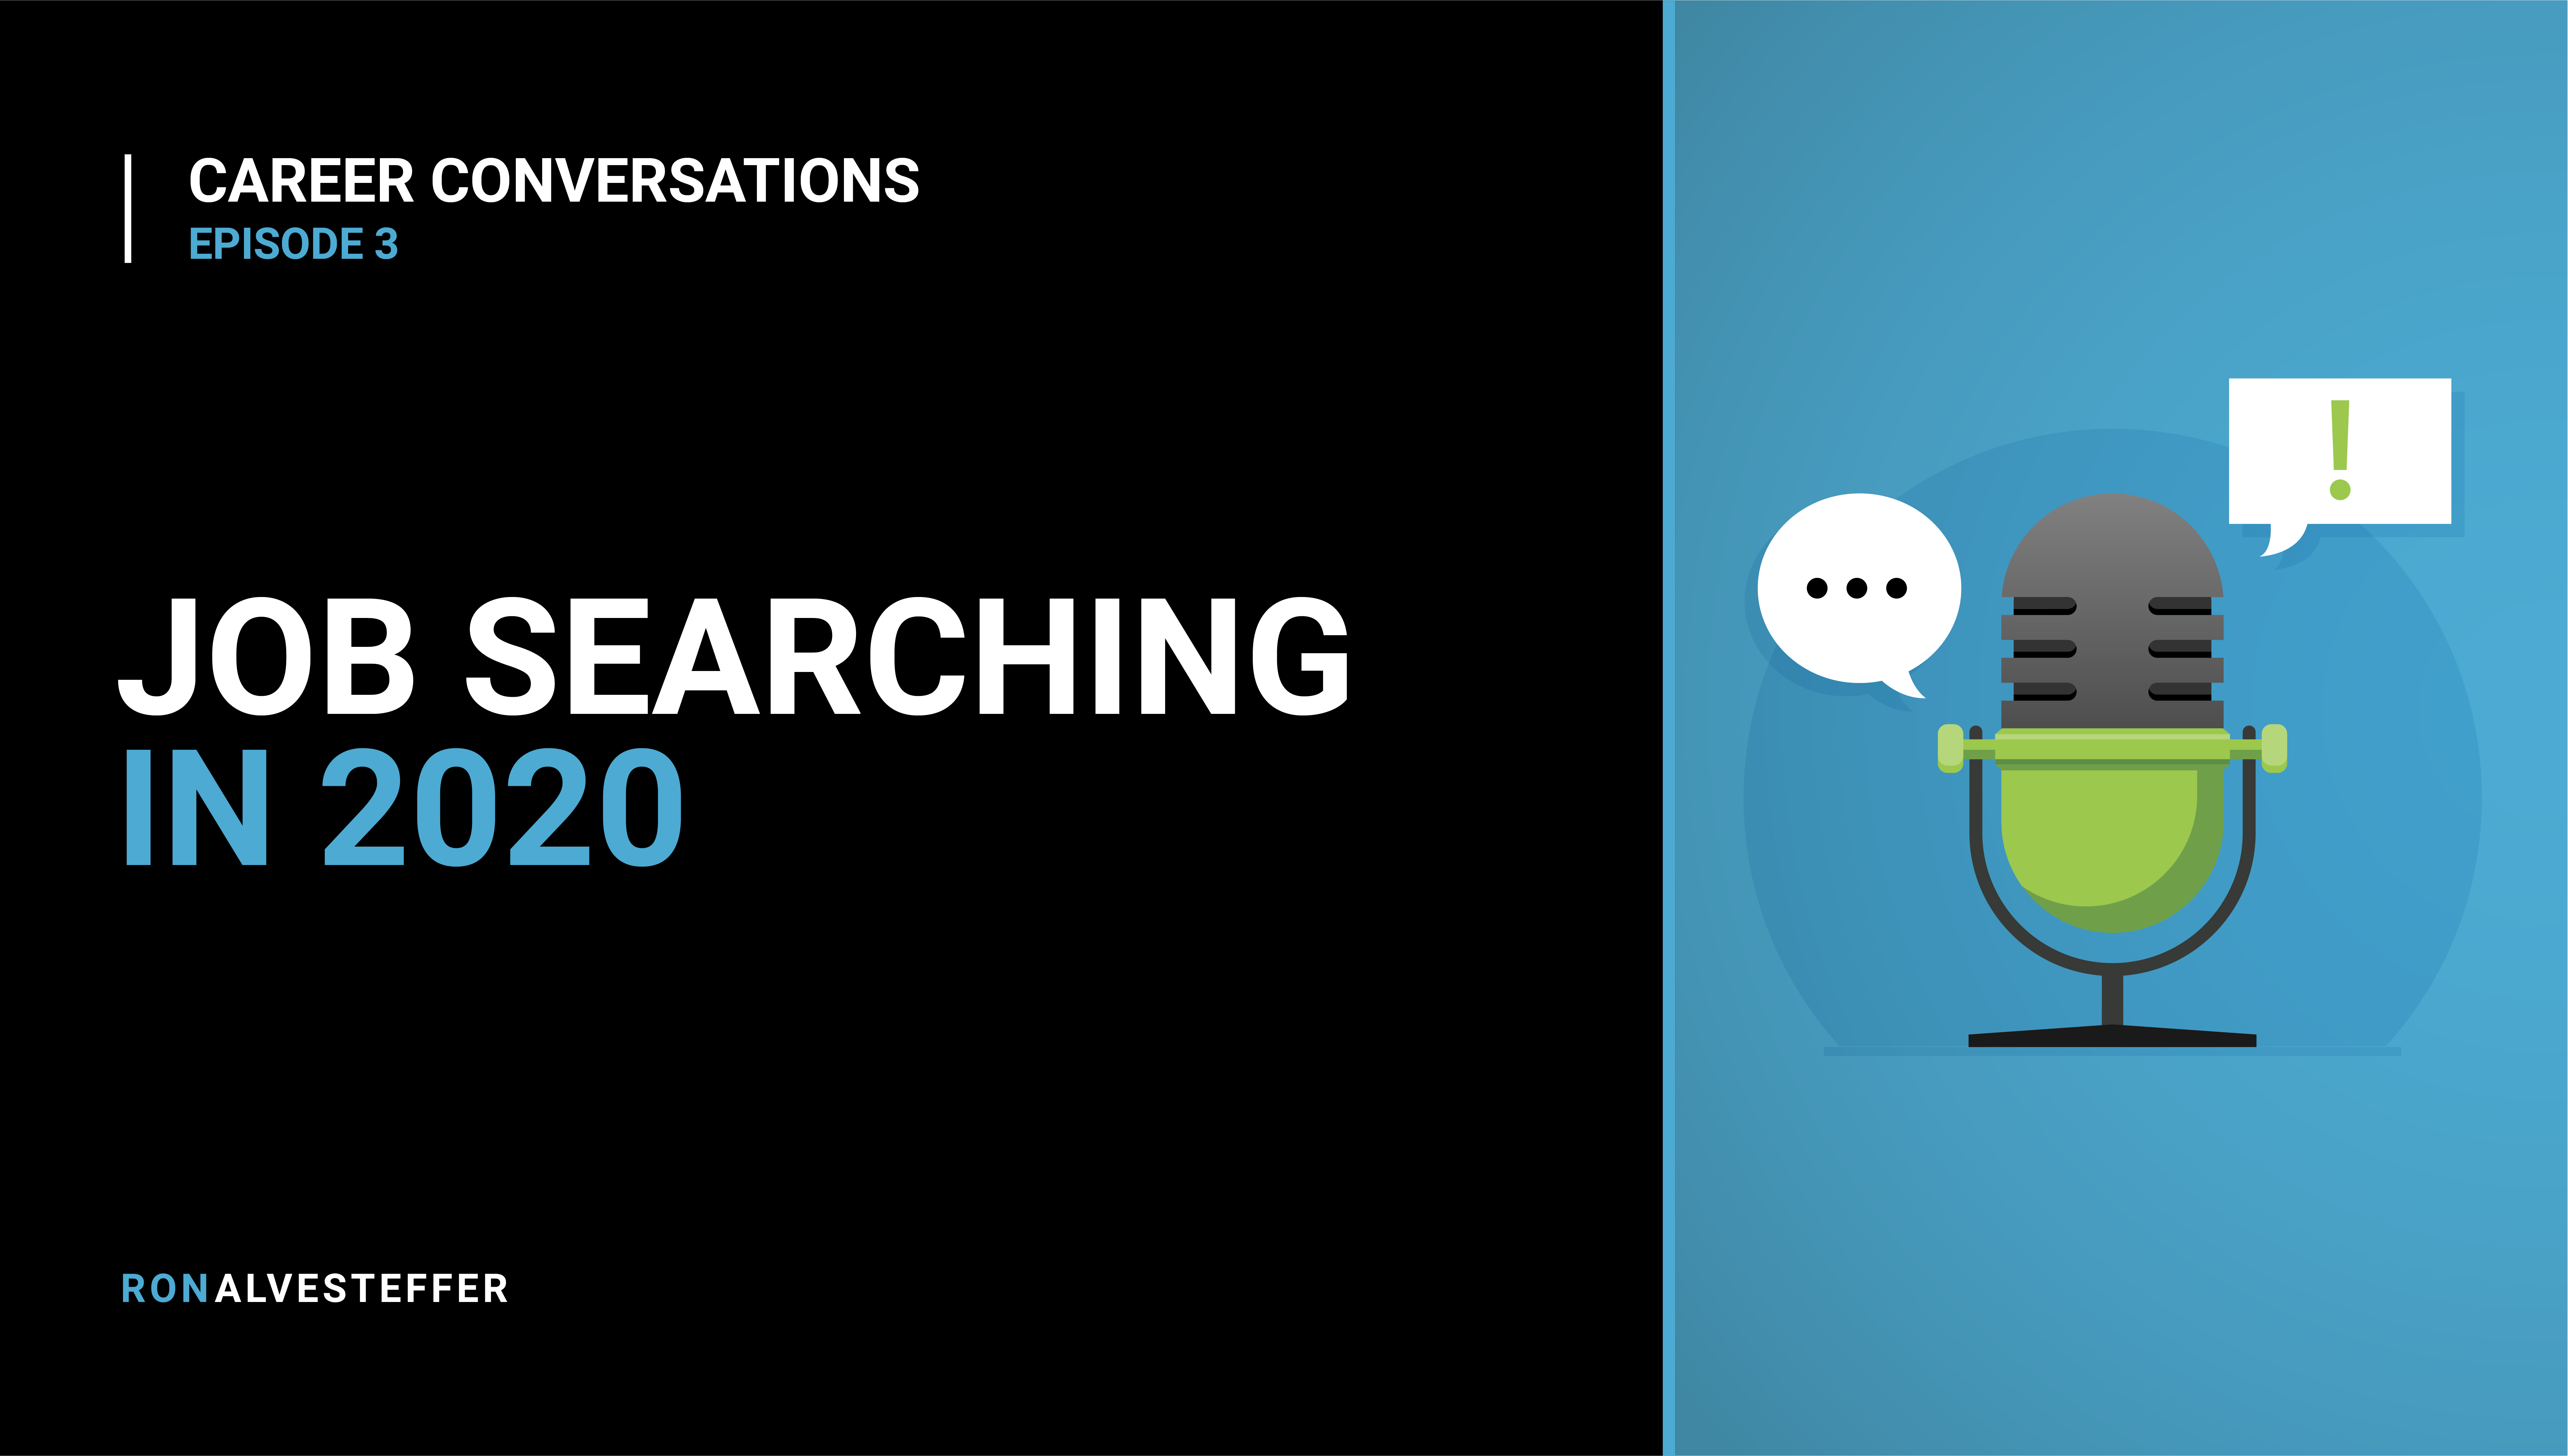 Career Conversations: Job Searching in 2020